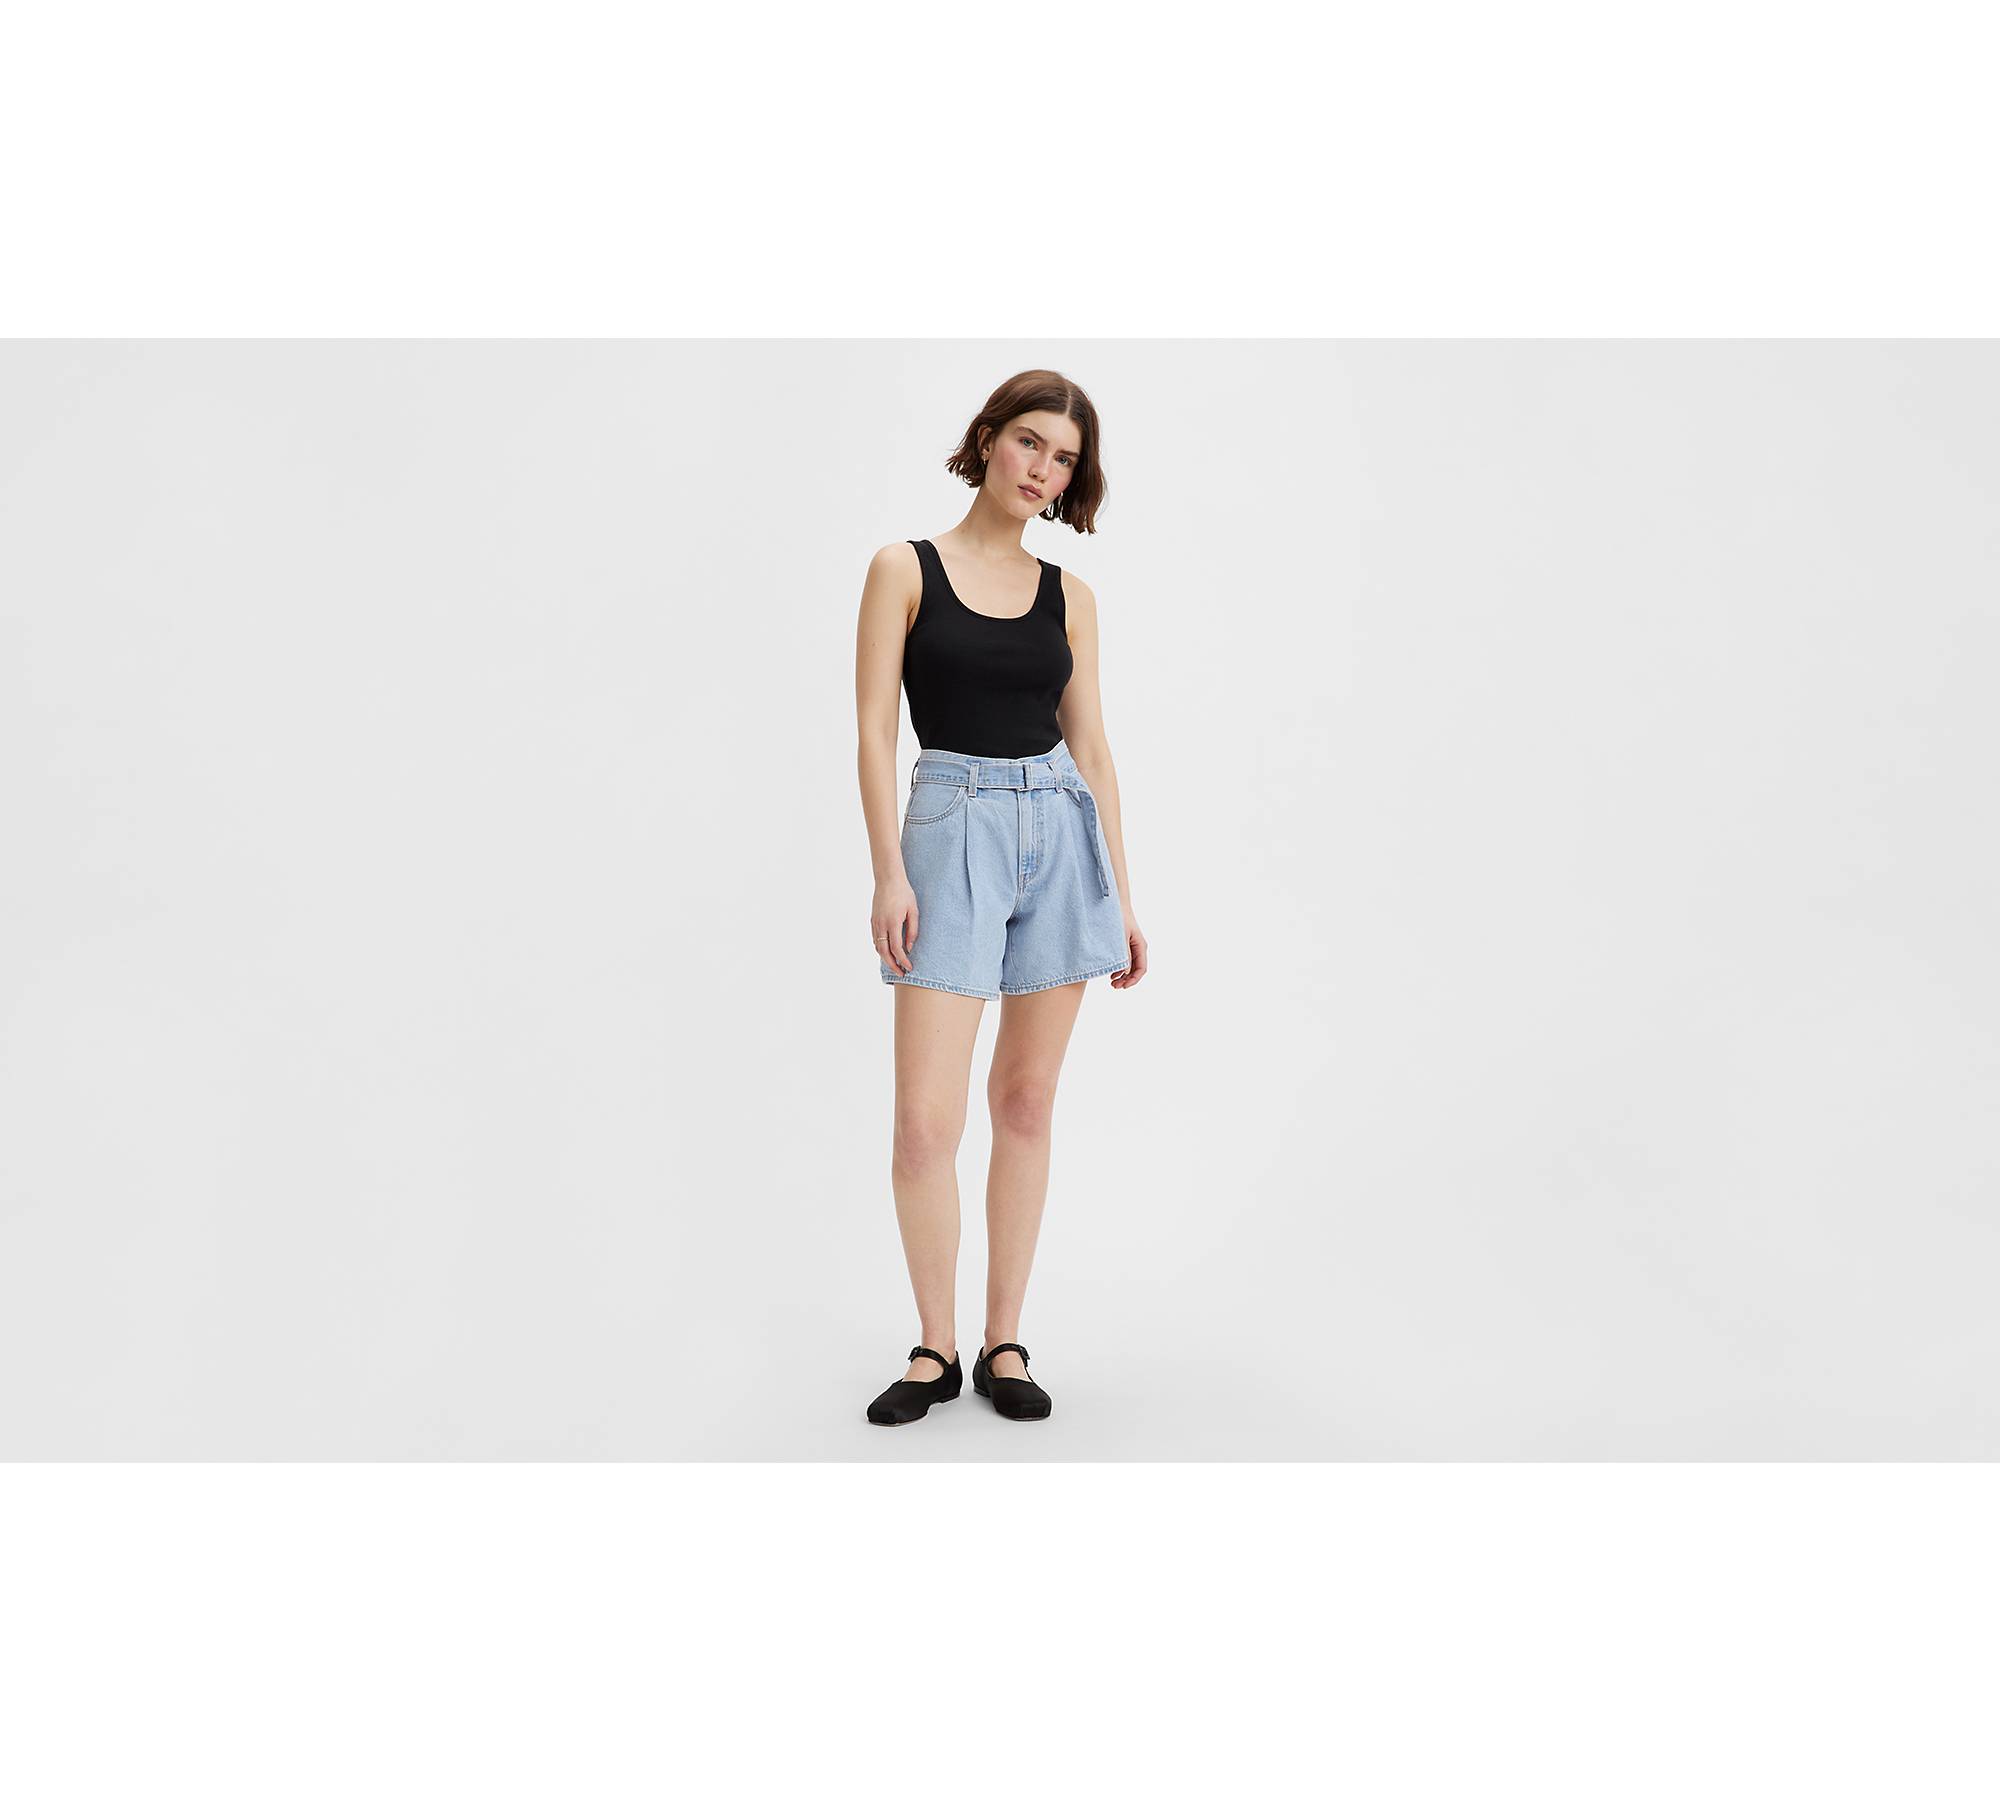 Belted Baggy Women's Shorts - Light Wash | Levi's® US